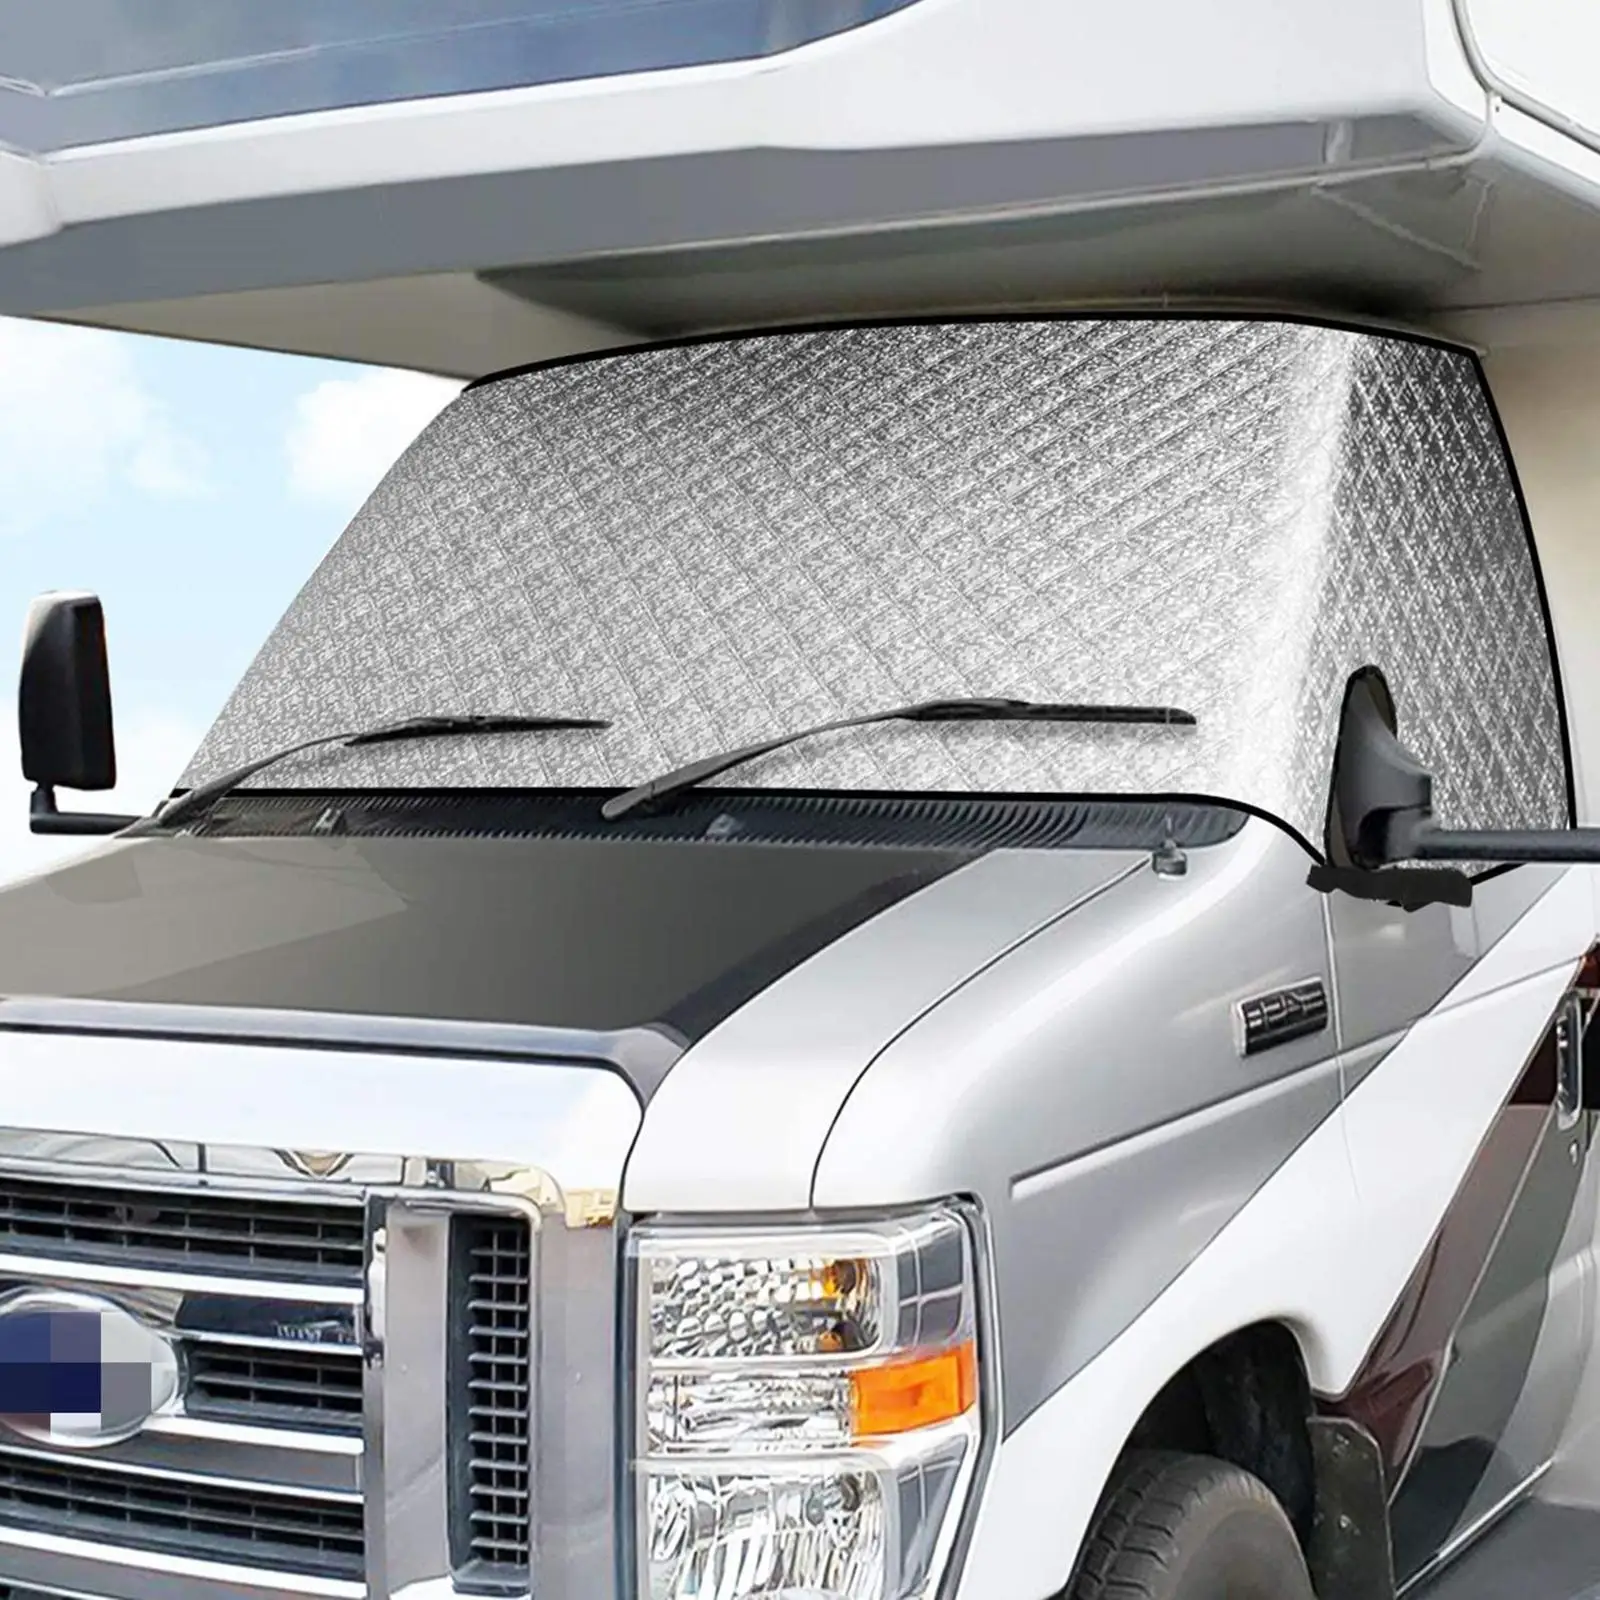 Windshield Sunshade Cover Durable  Protect  Visor for RV Motorhome